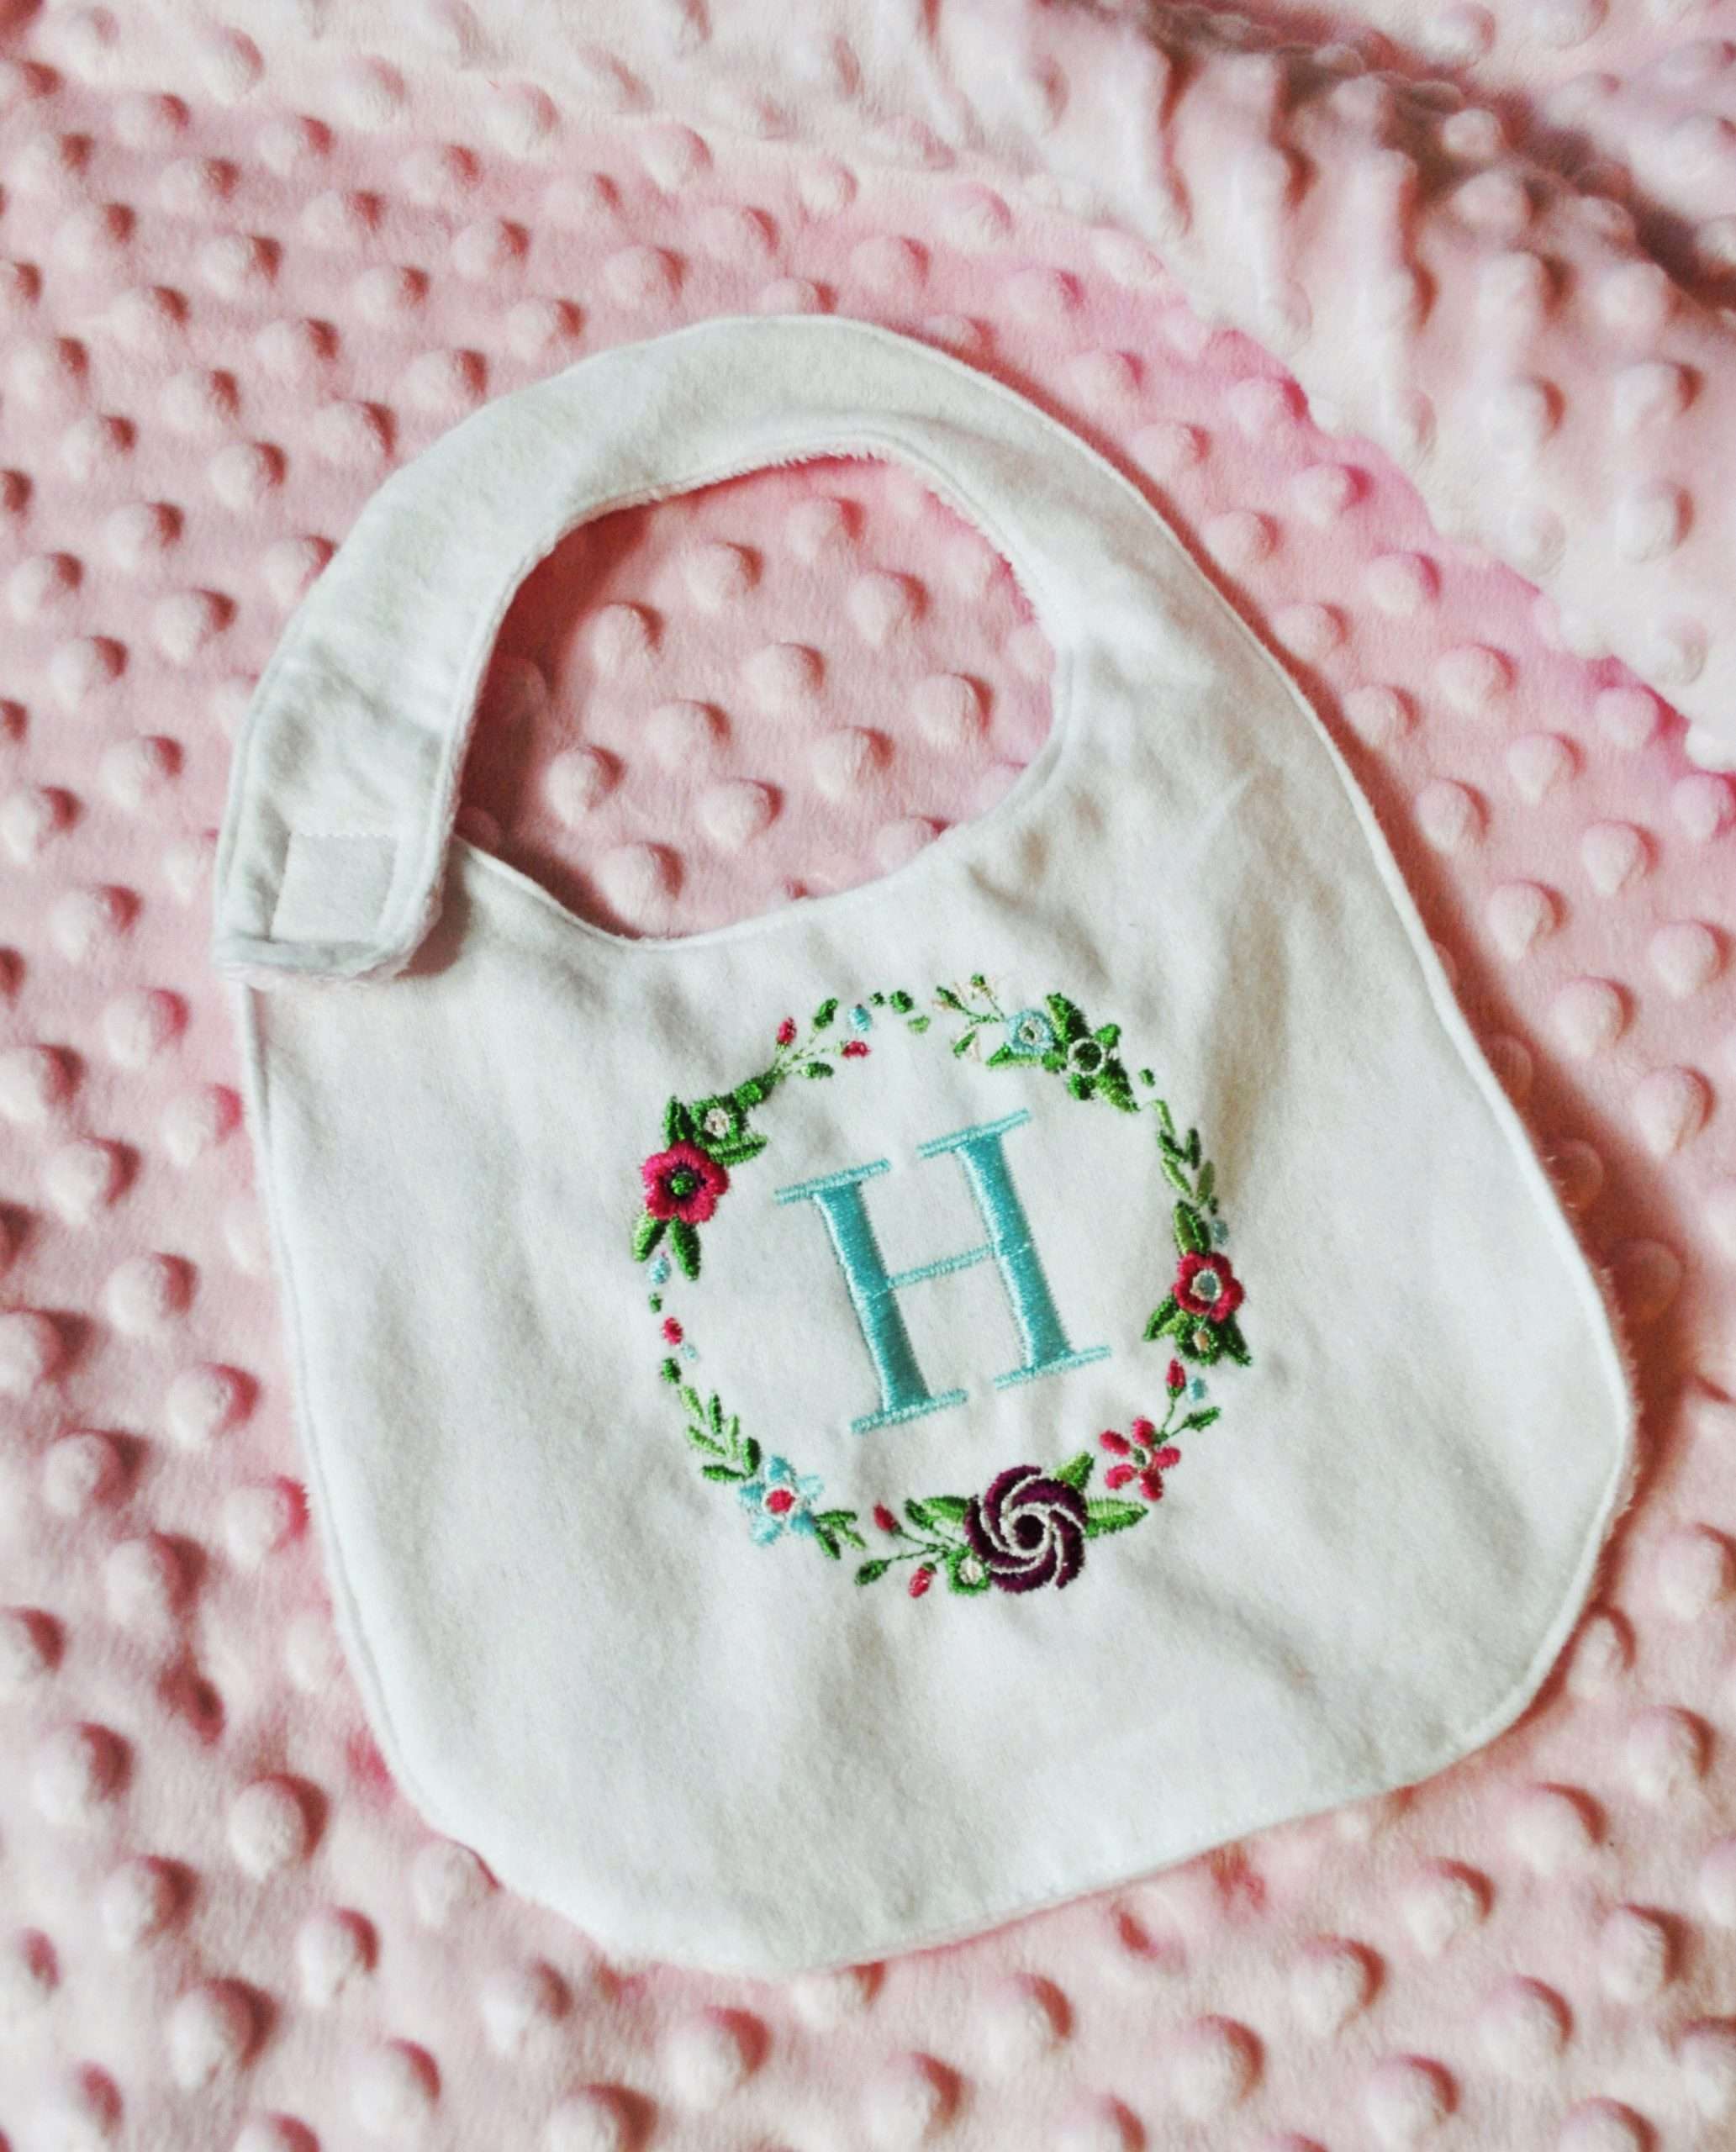 How to Make Customized Baby Shower Gifts